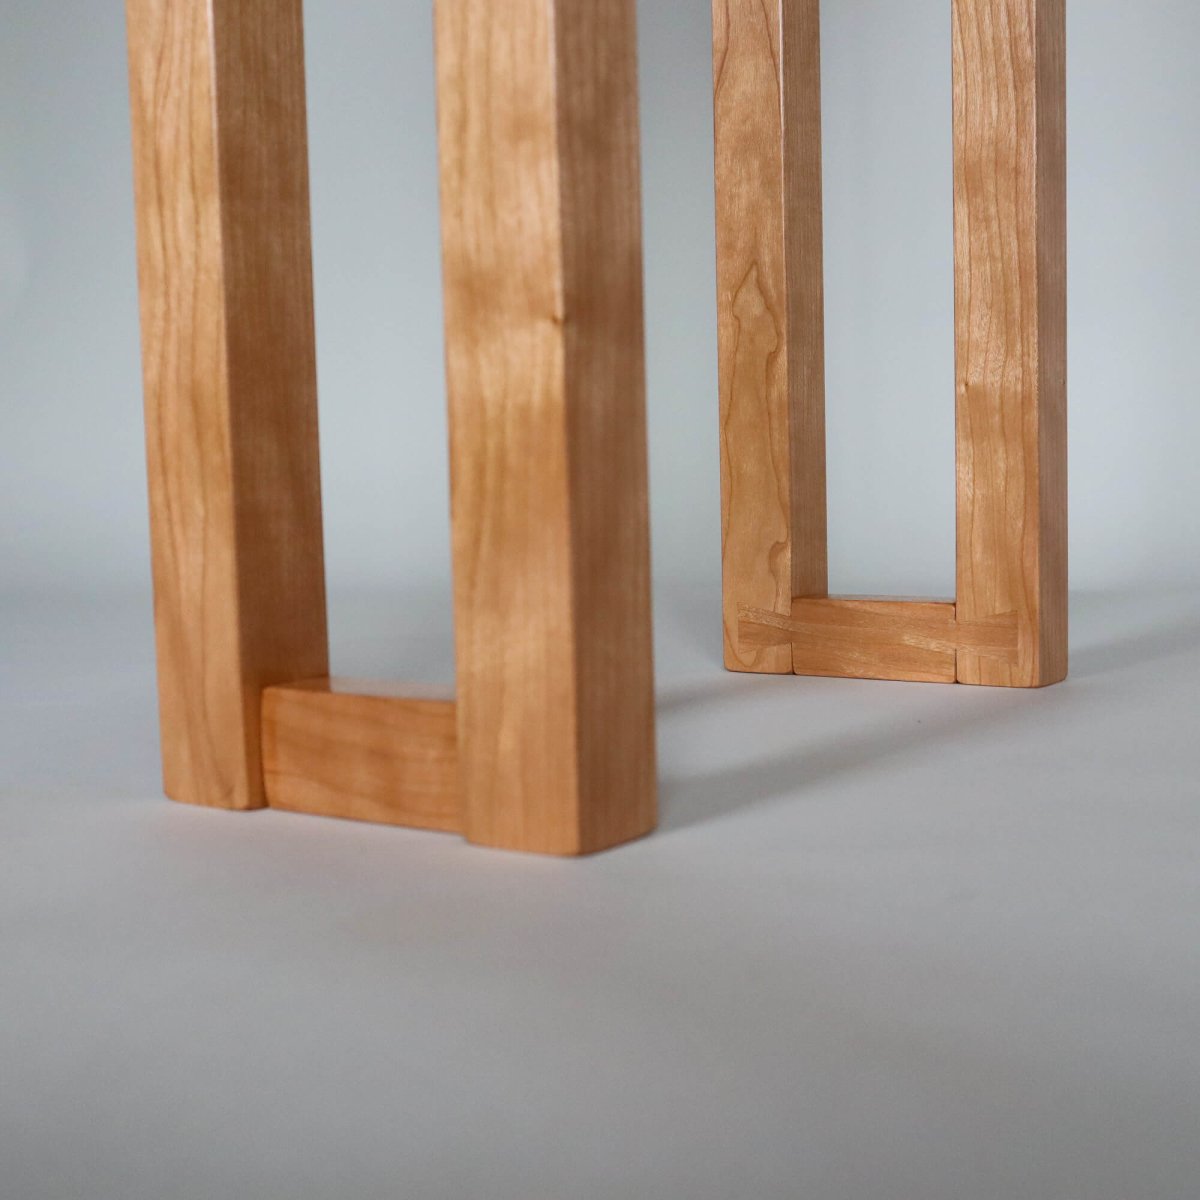 unique dovetail feet details on this modern wooden side table by Mokuzai Furniture- a narrow table with shelf for hallway decorating or small entryway design